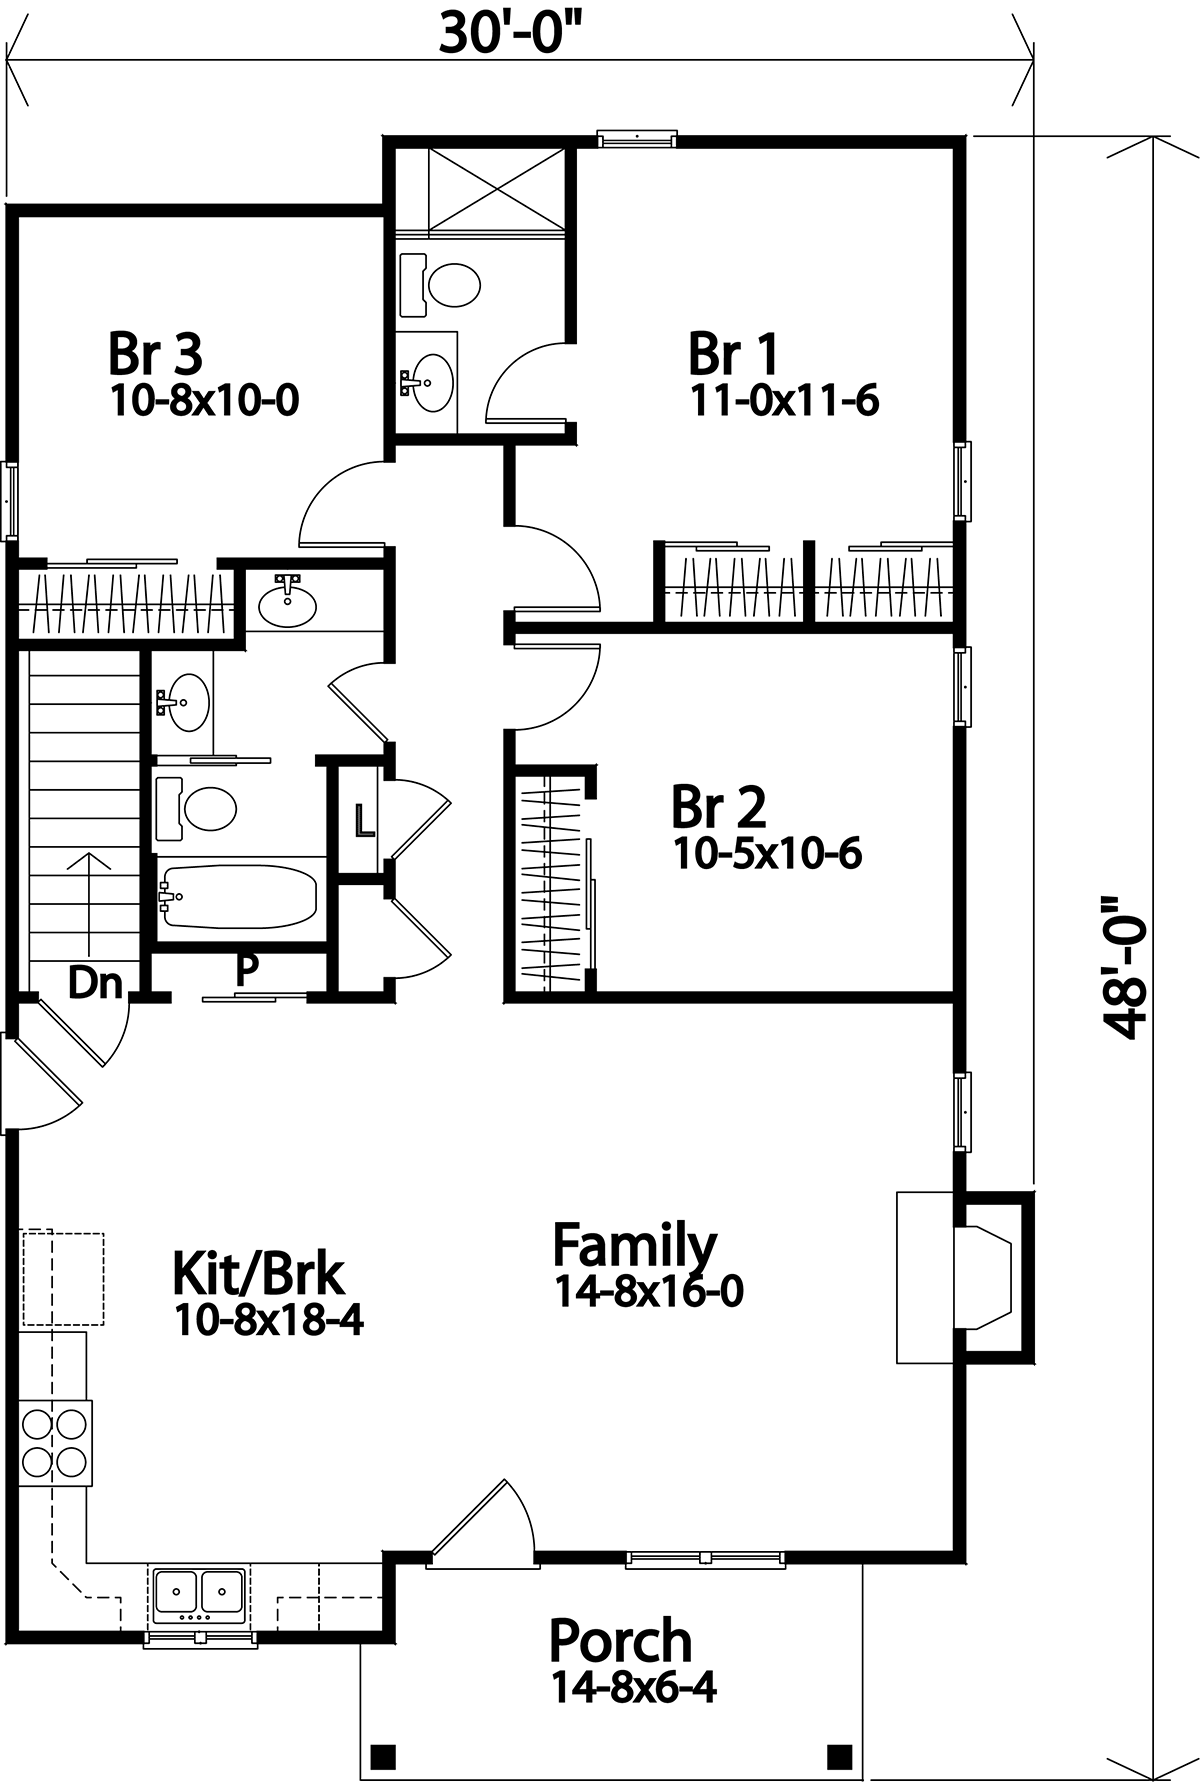 House Plan 45177 OneStory Style with 1181 Sq Ft, 3 Bed